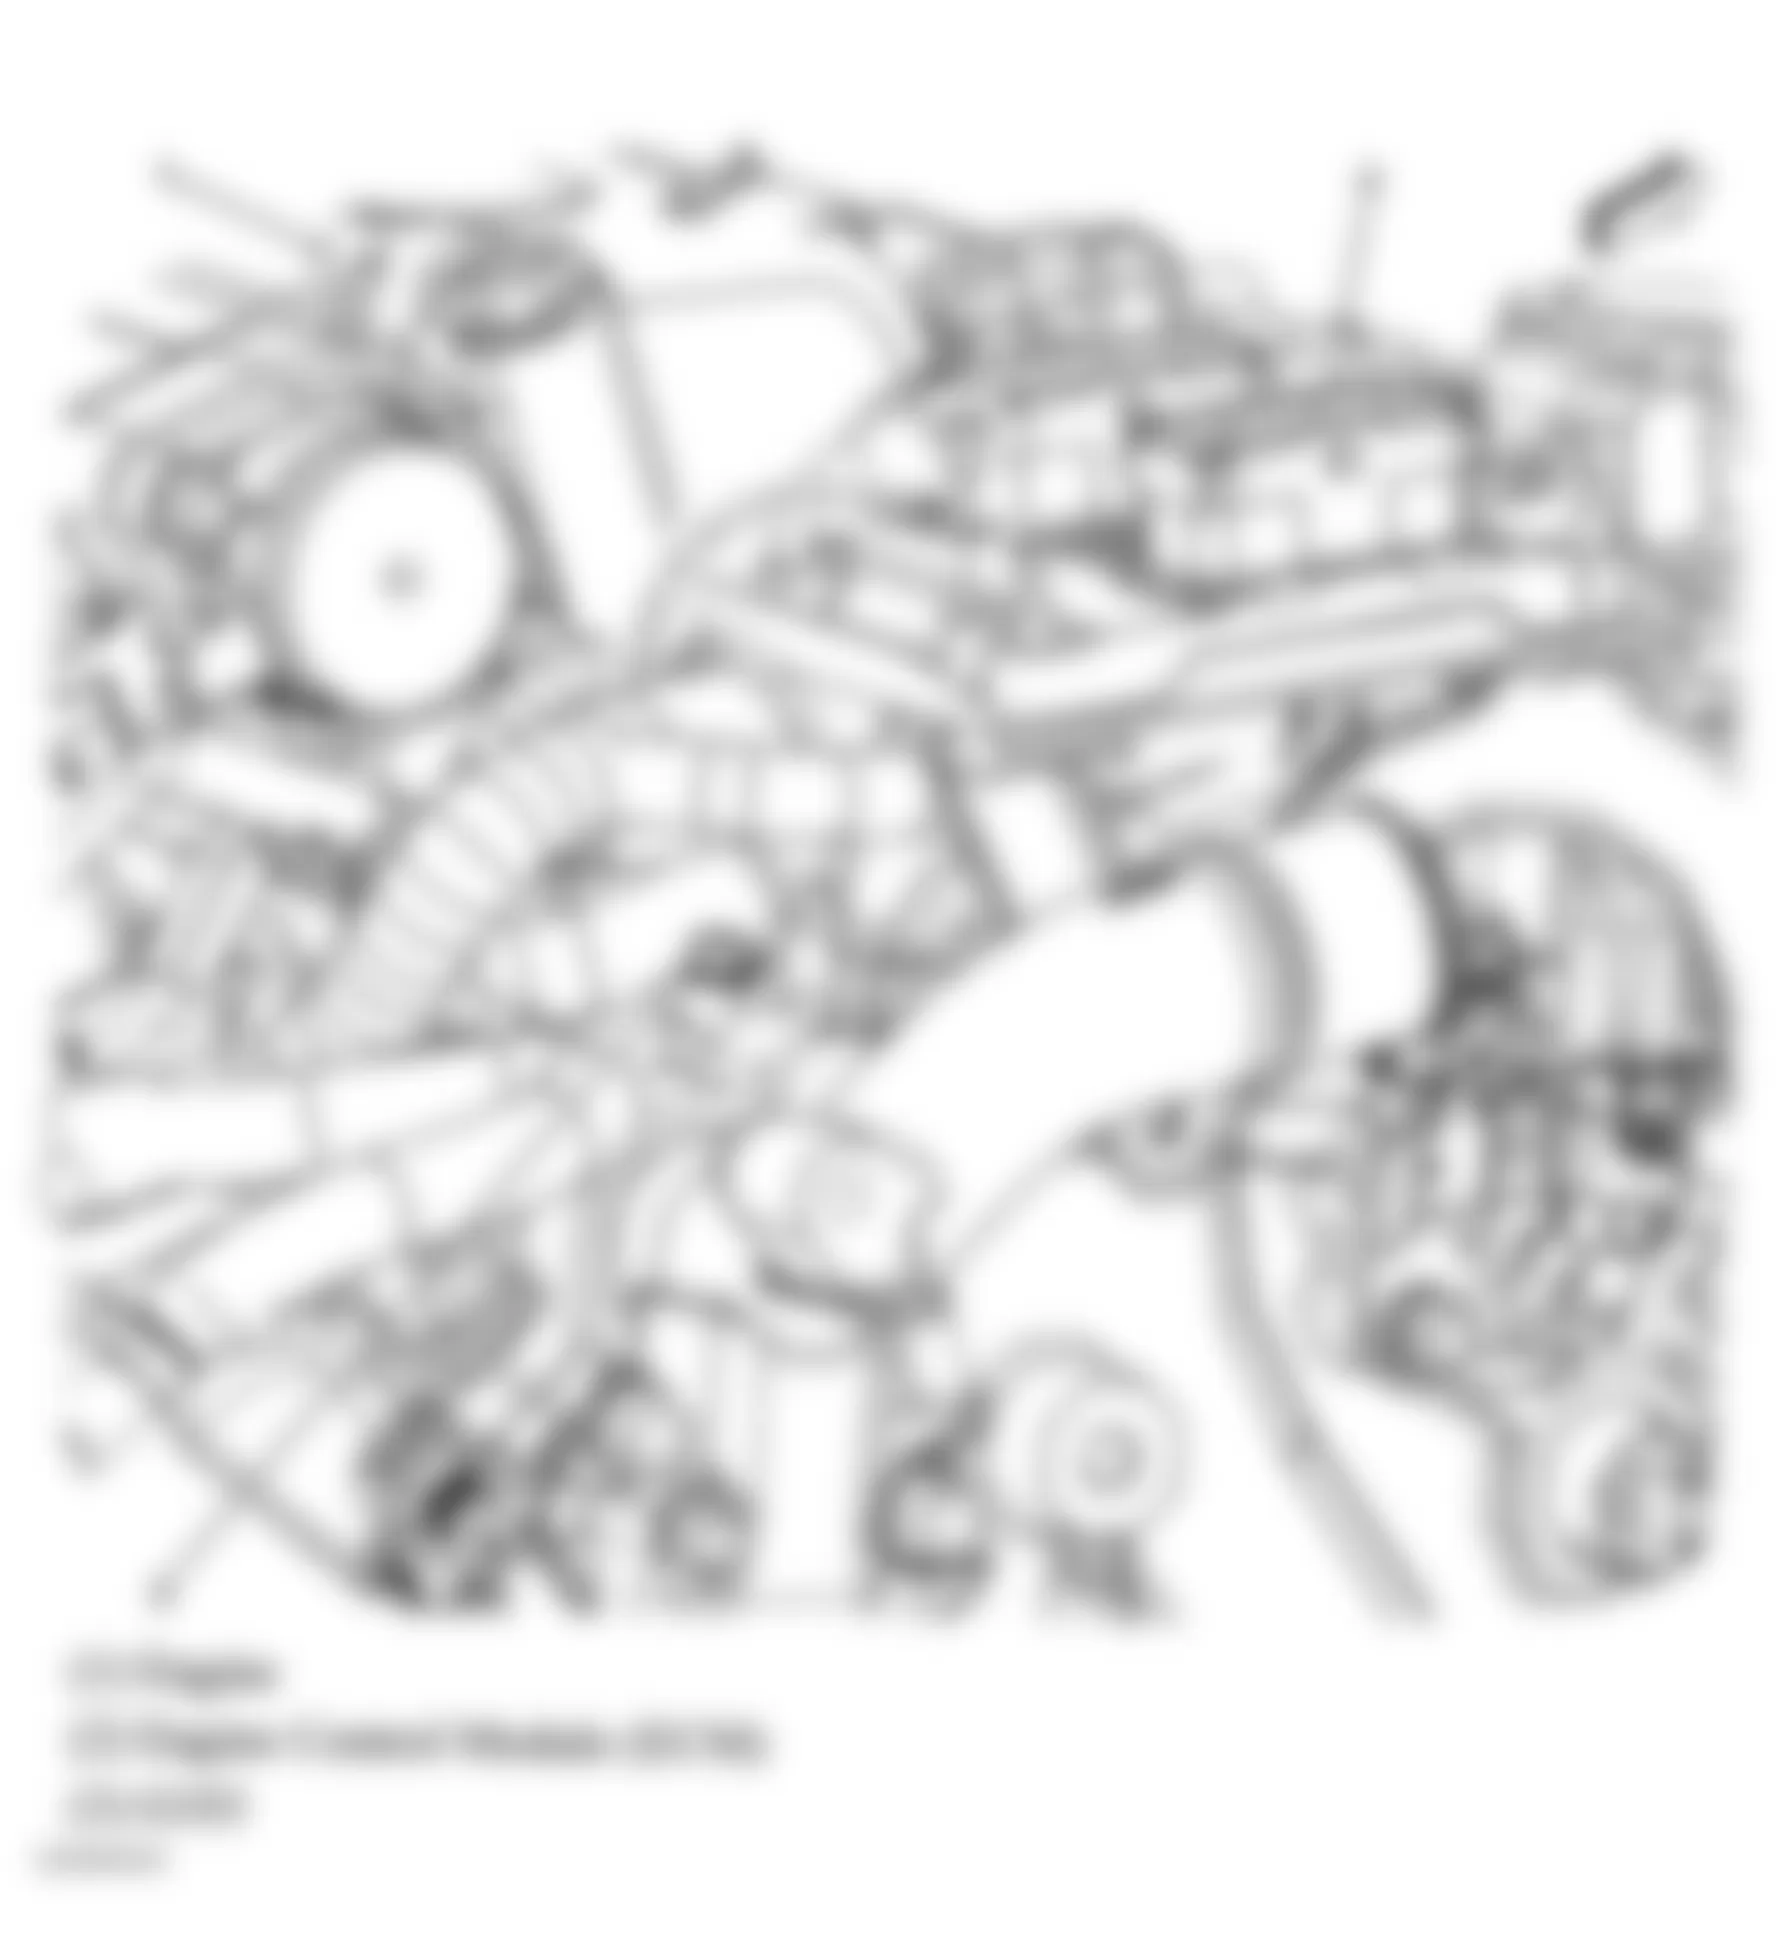 Buick Allure CXL 2005 - Component Locations -  Engine Assembly (3.6L)